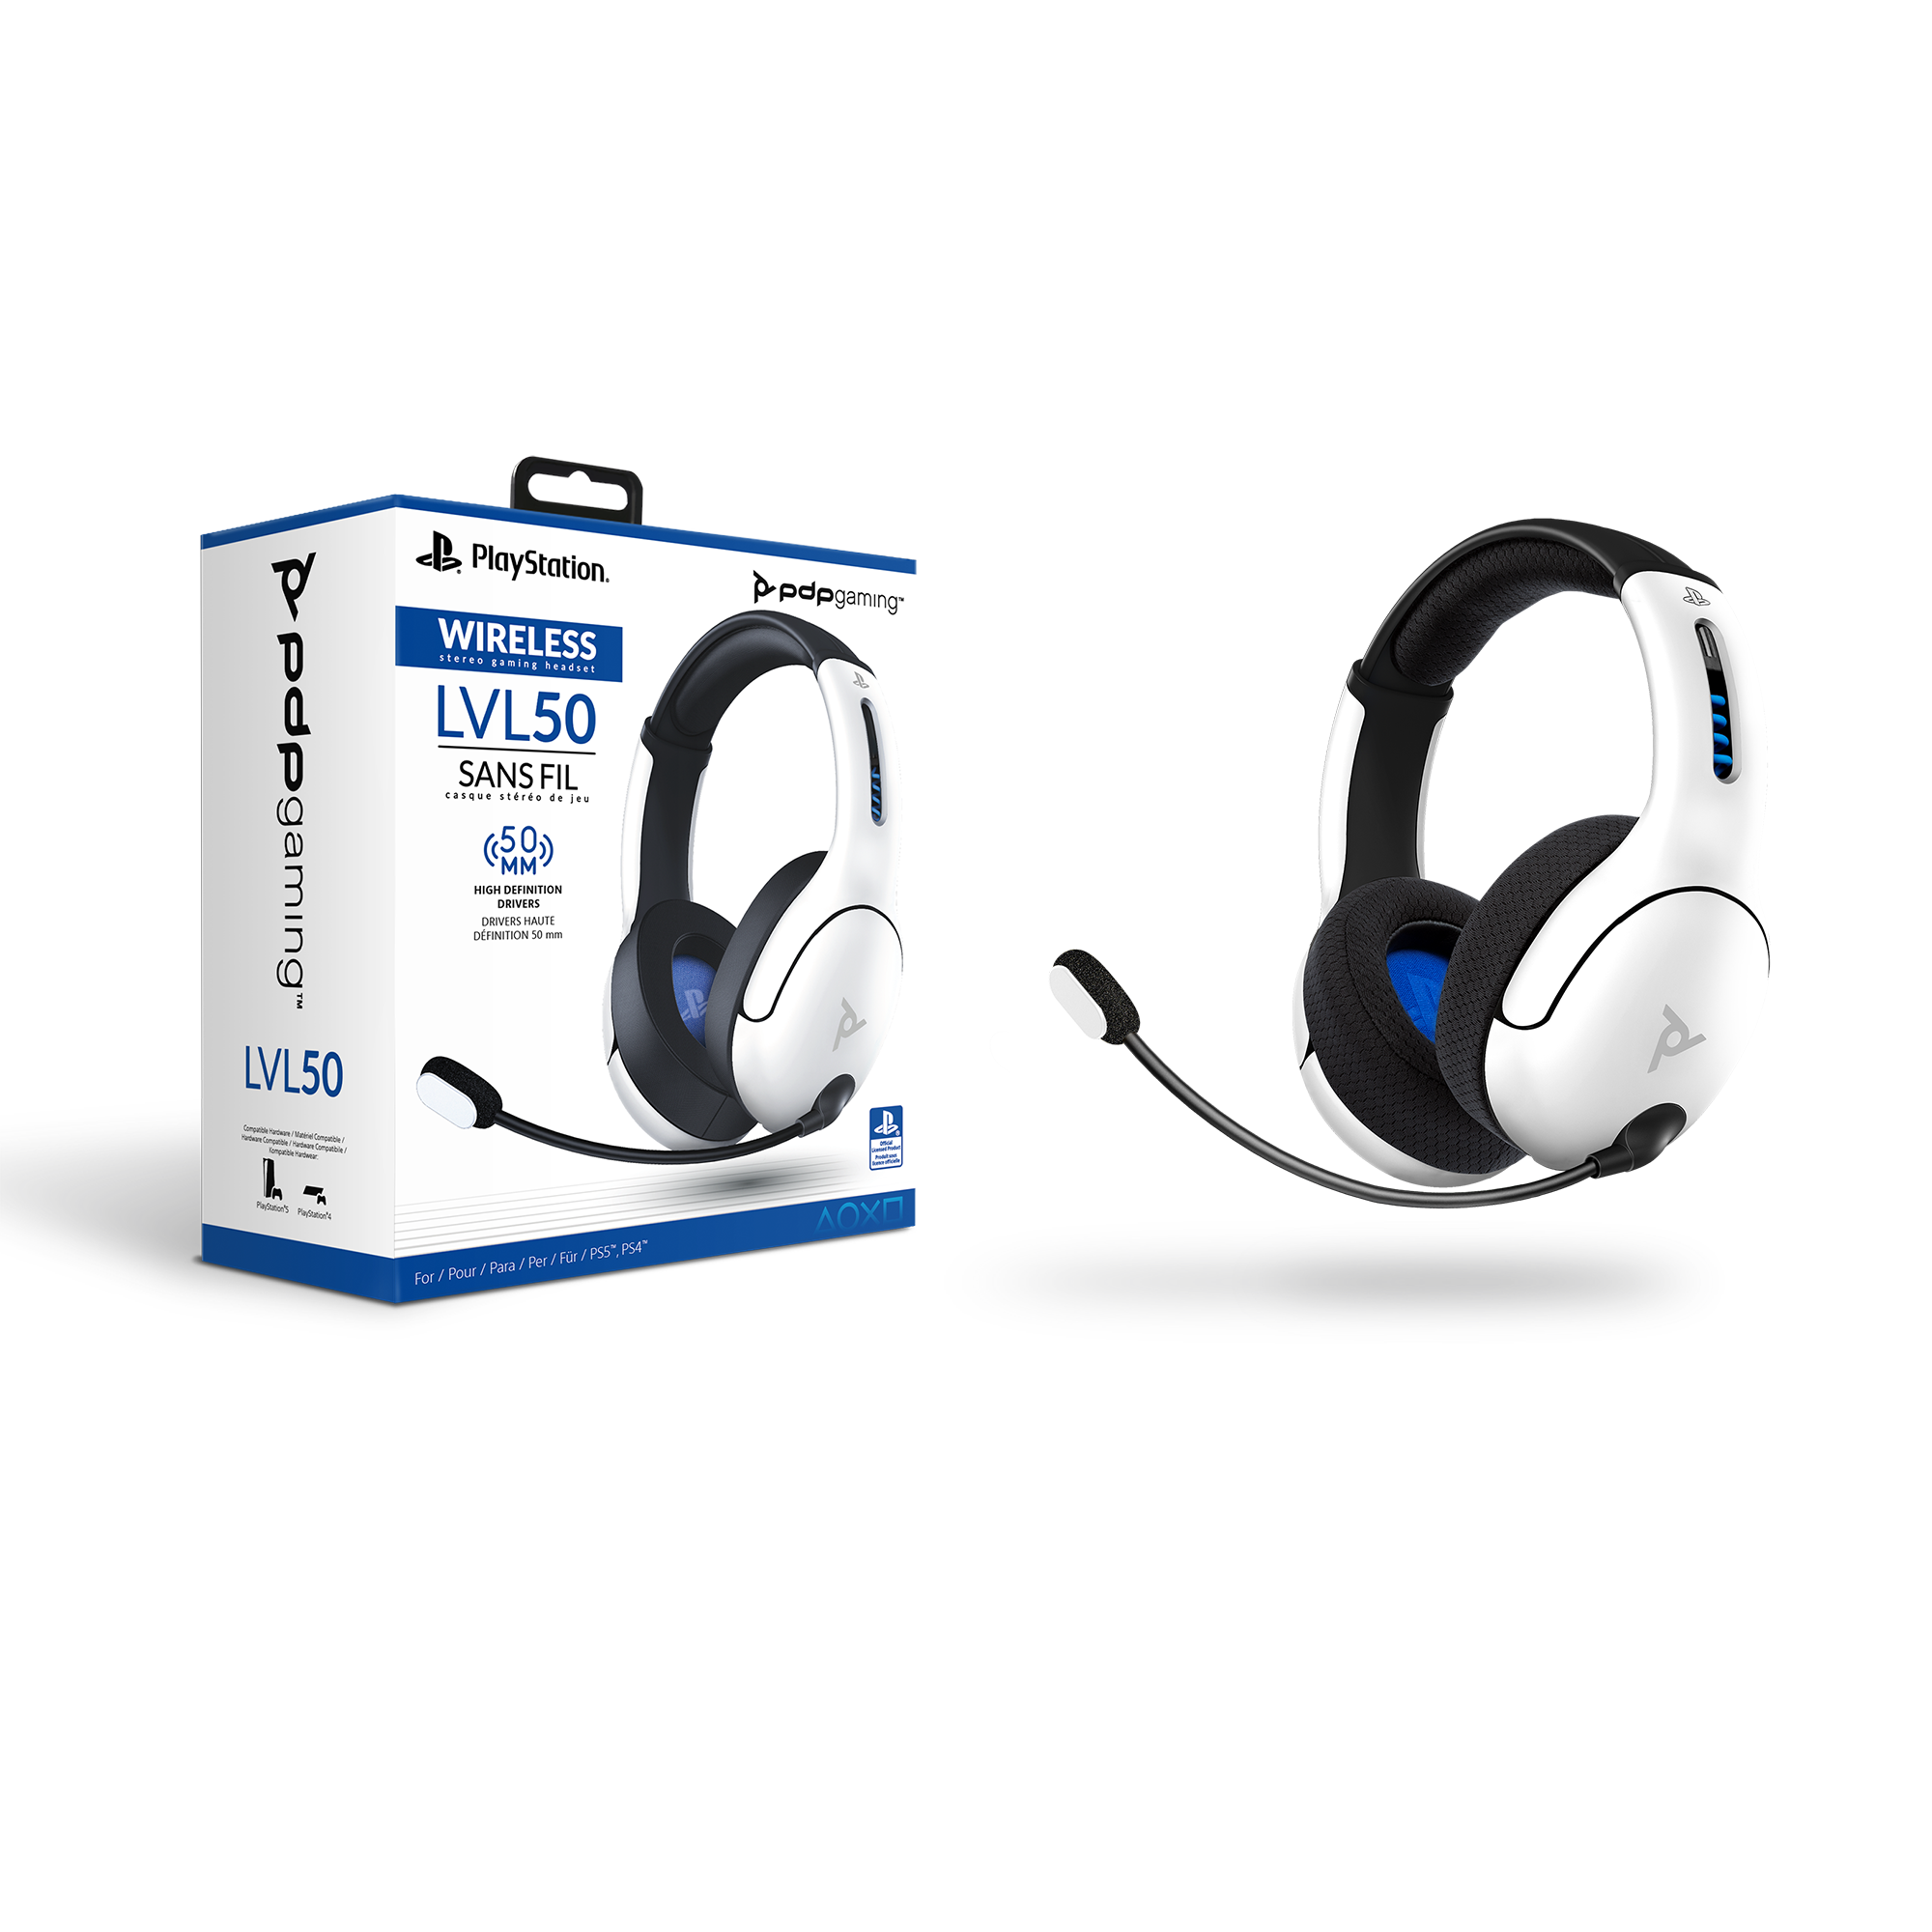 list item 2 of 9 PDP Gaming LVL50 Wireless Stereo Headset for PlayStation 4 White